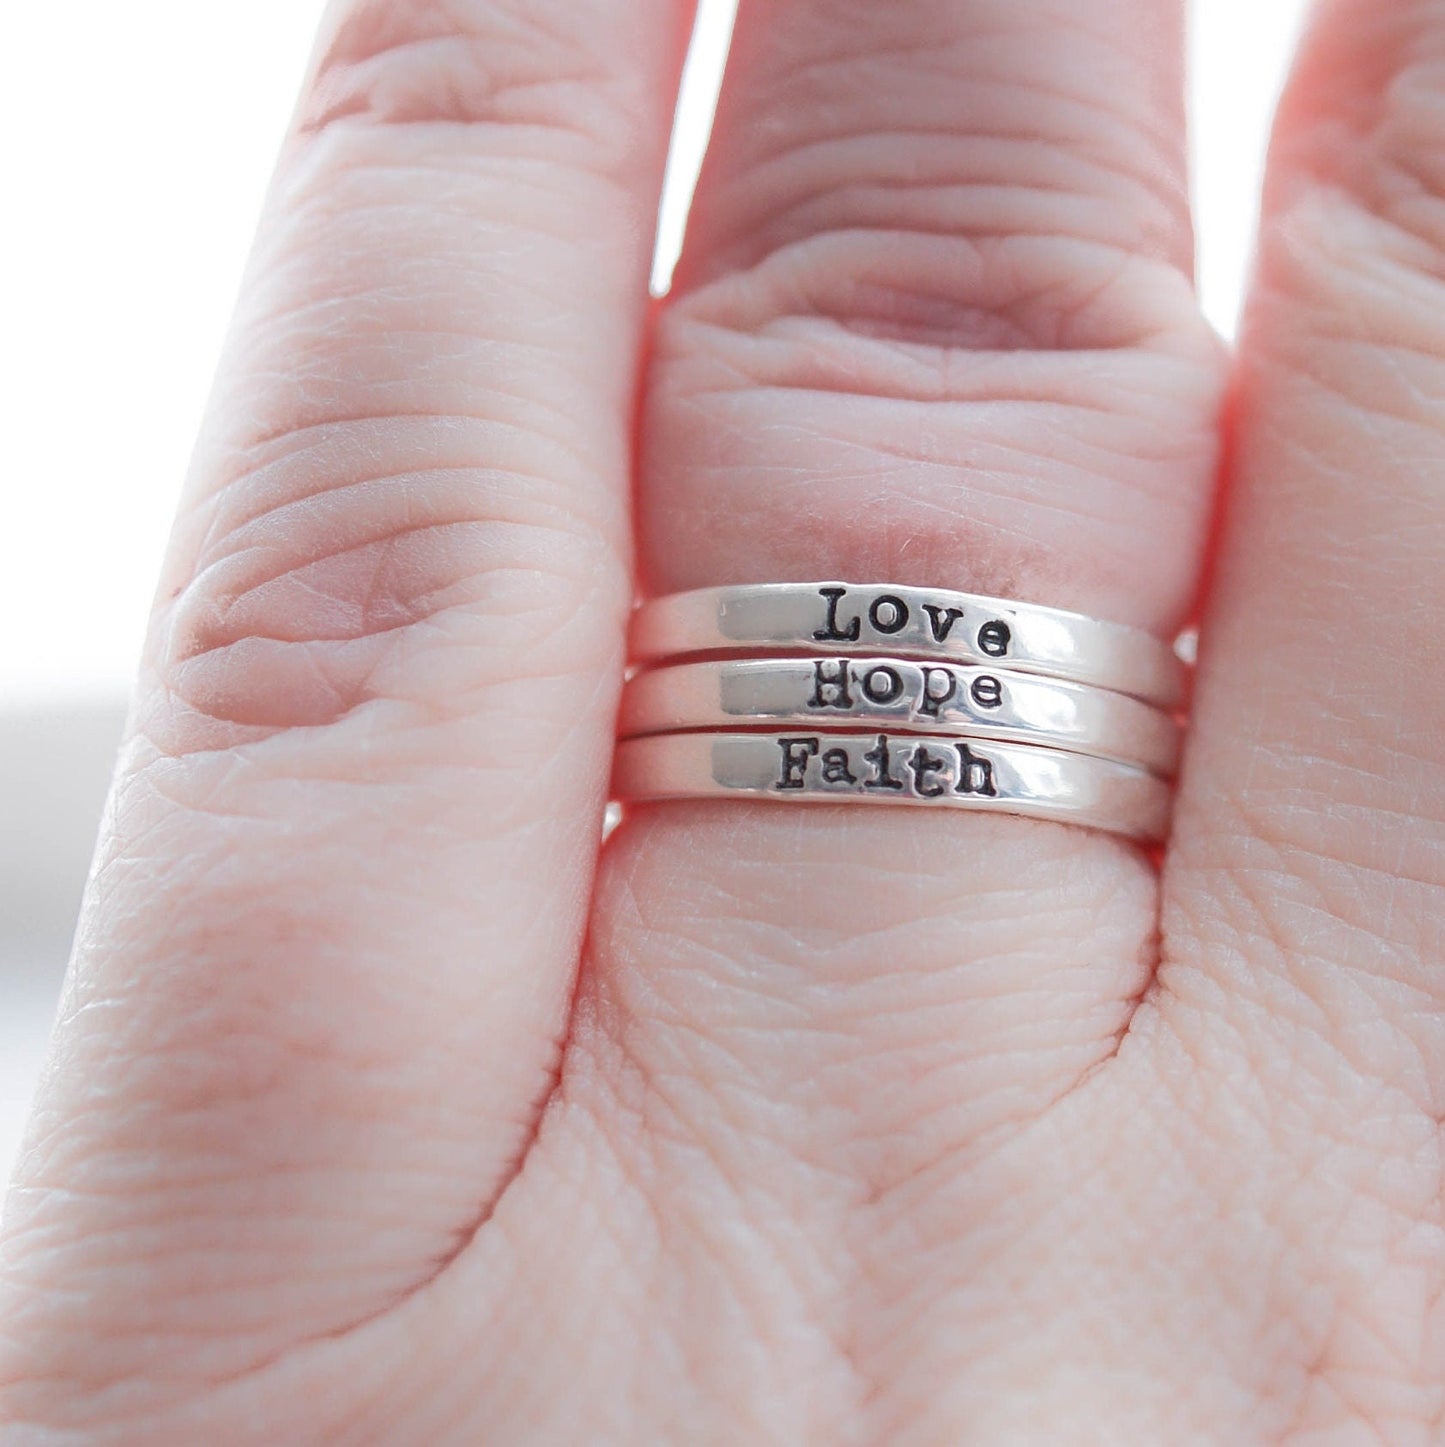 3 Sterling silver rings stamped with Faith, hope and love on hand